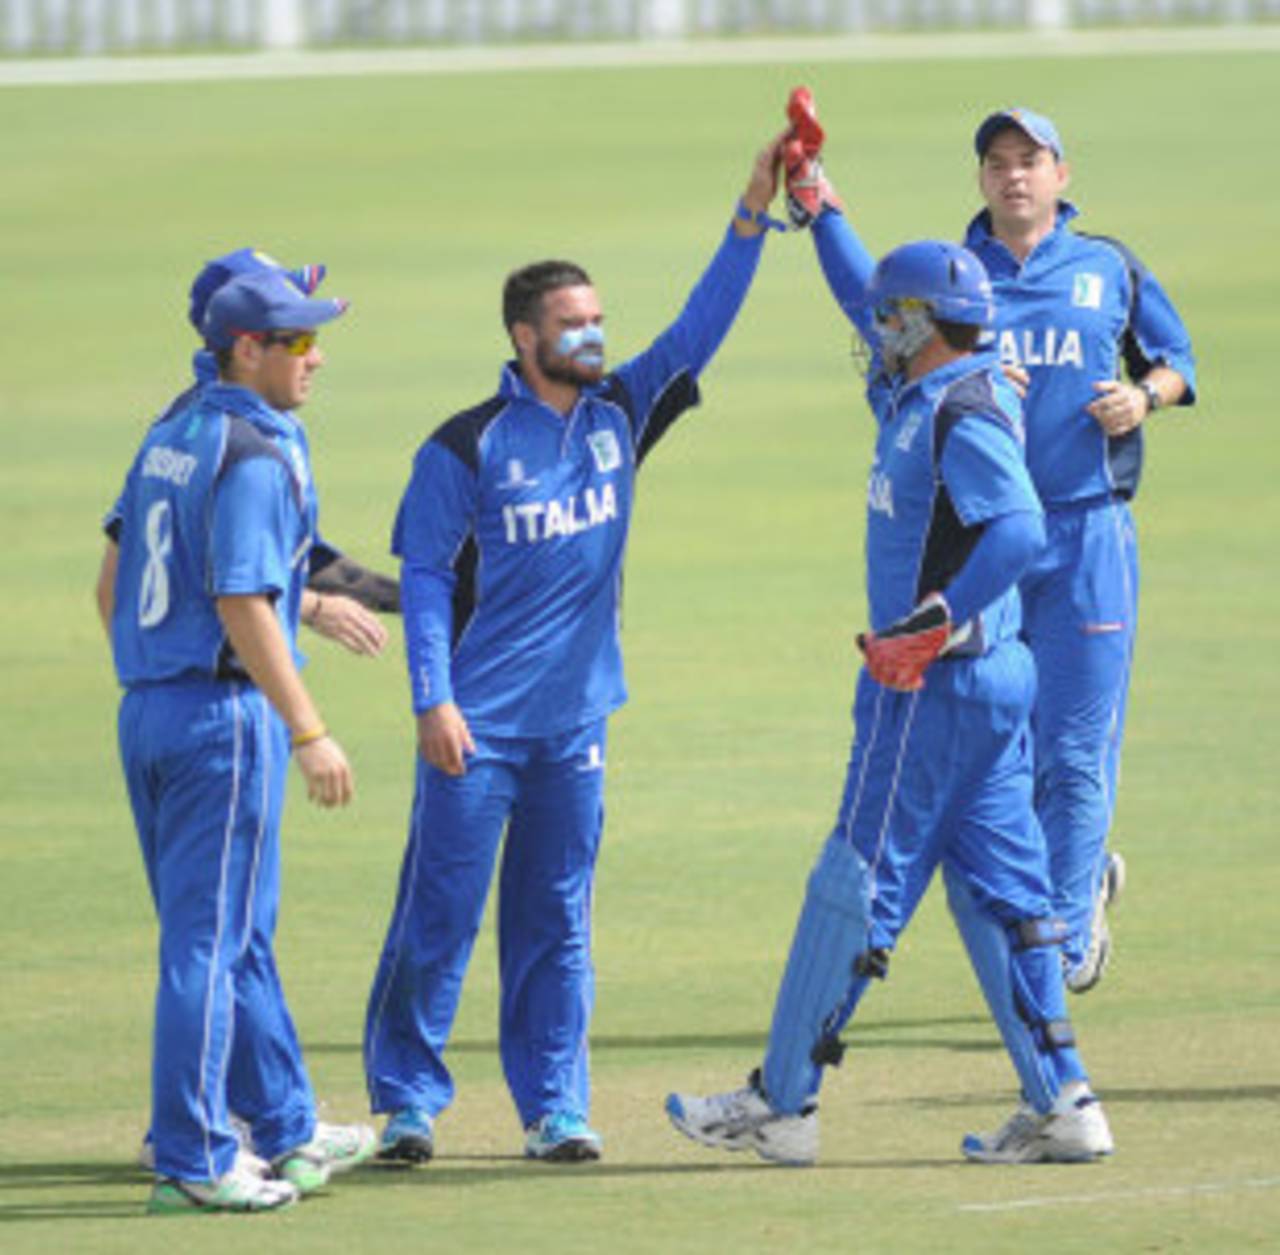 Italy are keen for their chance to compete with the leading Associate and Affiliate nations&nbsp;&nbsp;&bull;&nbsp;&nbsp;ICC/Ian Jacobs